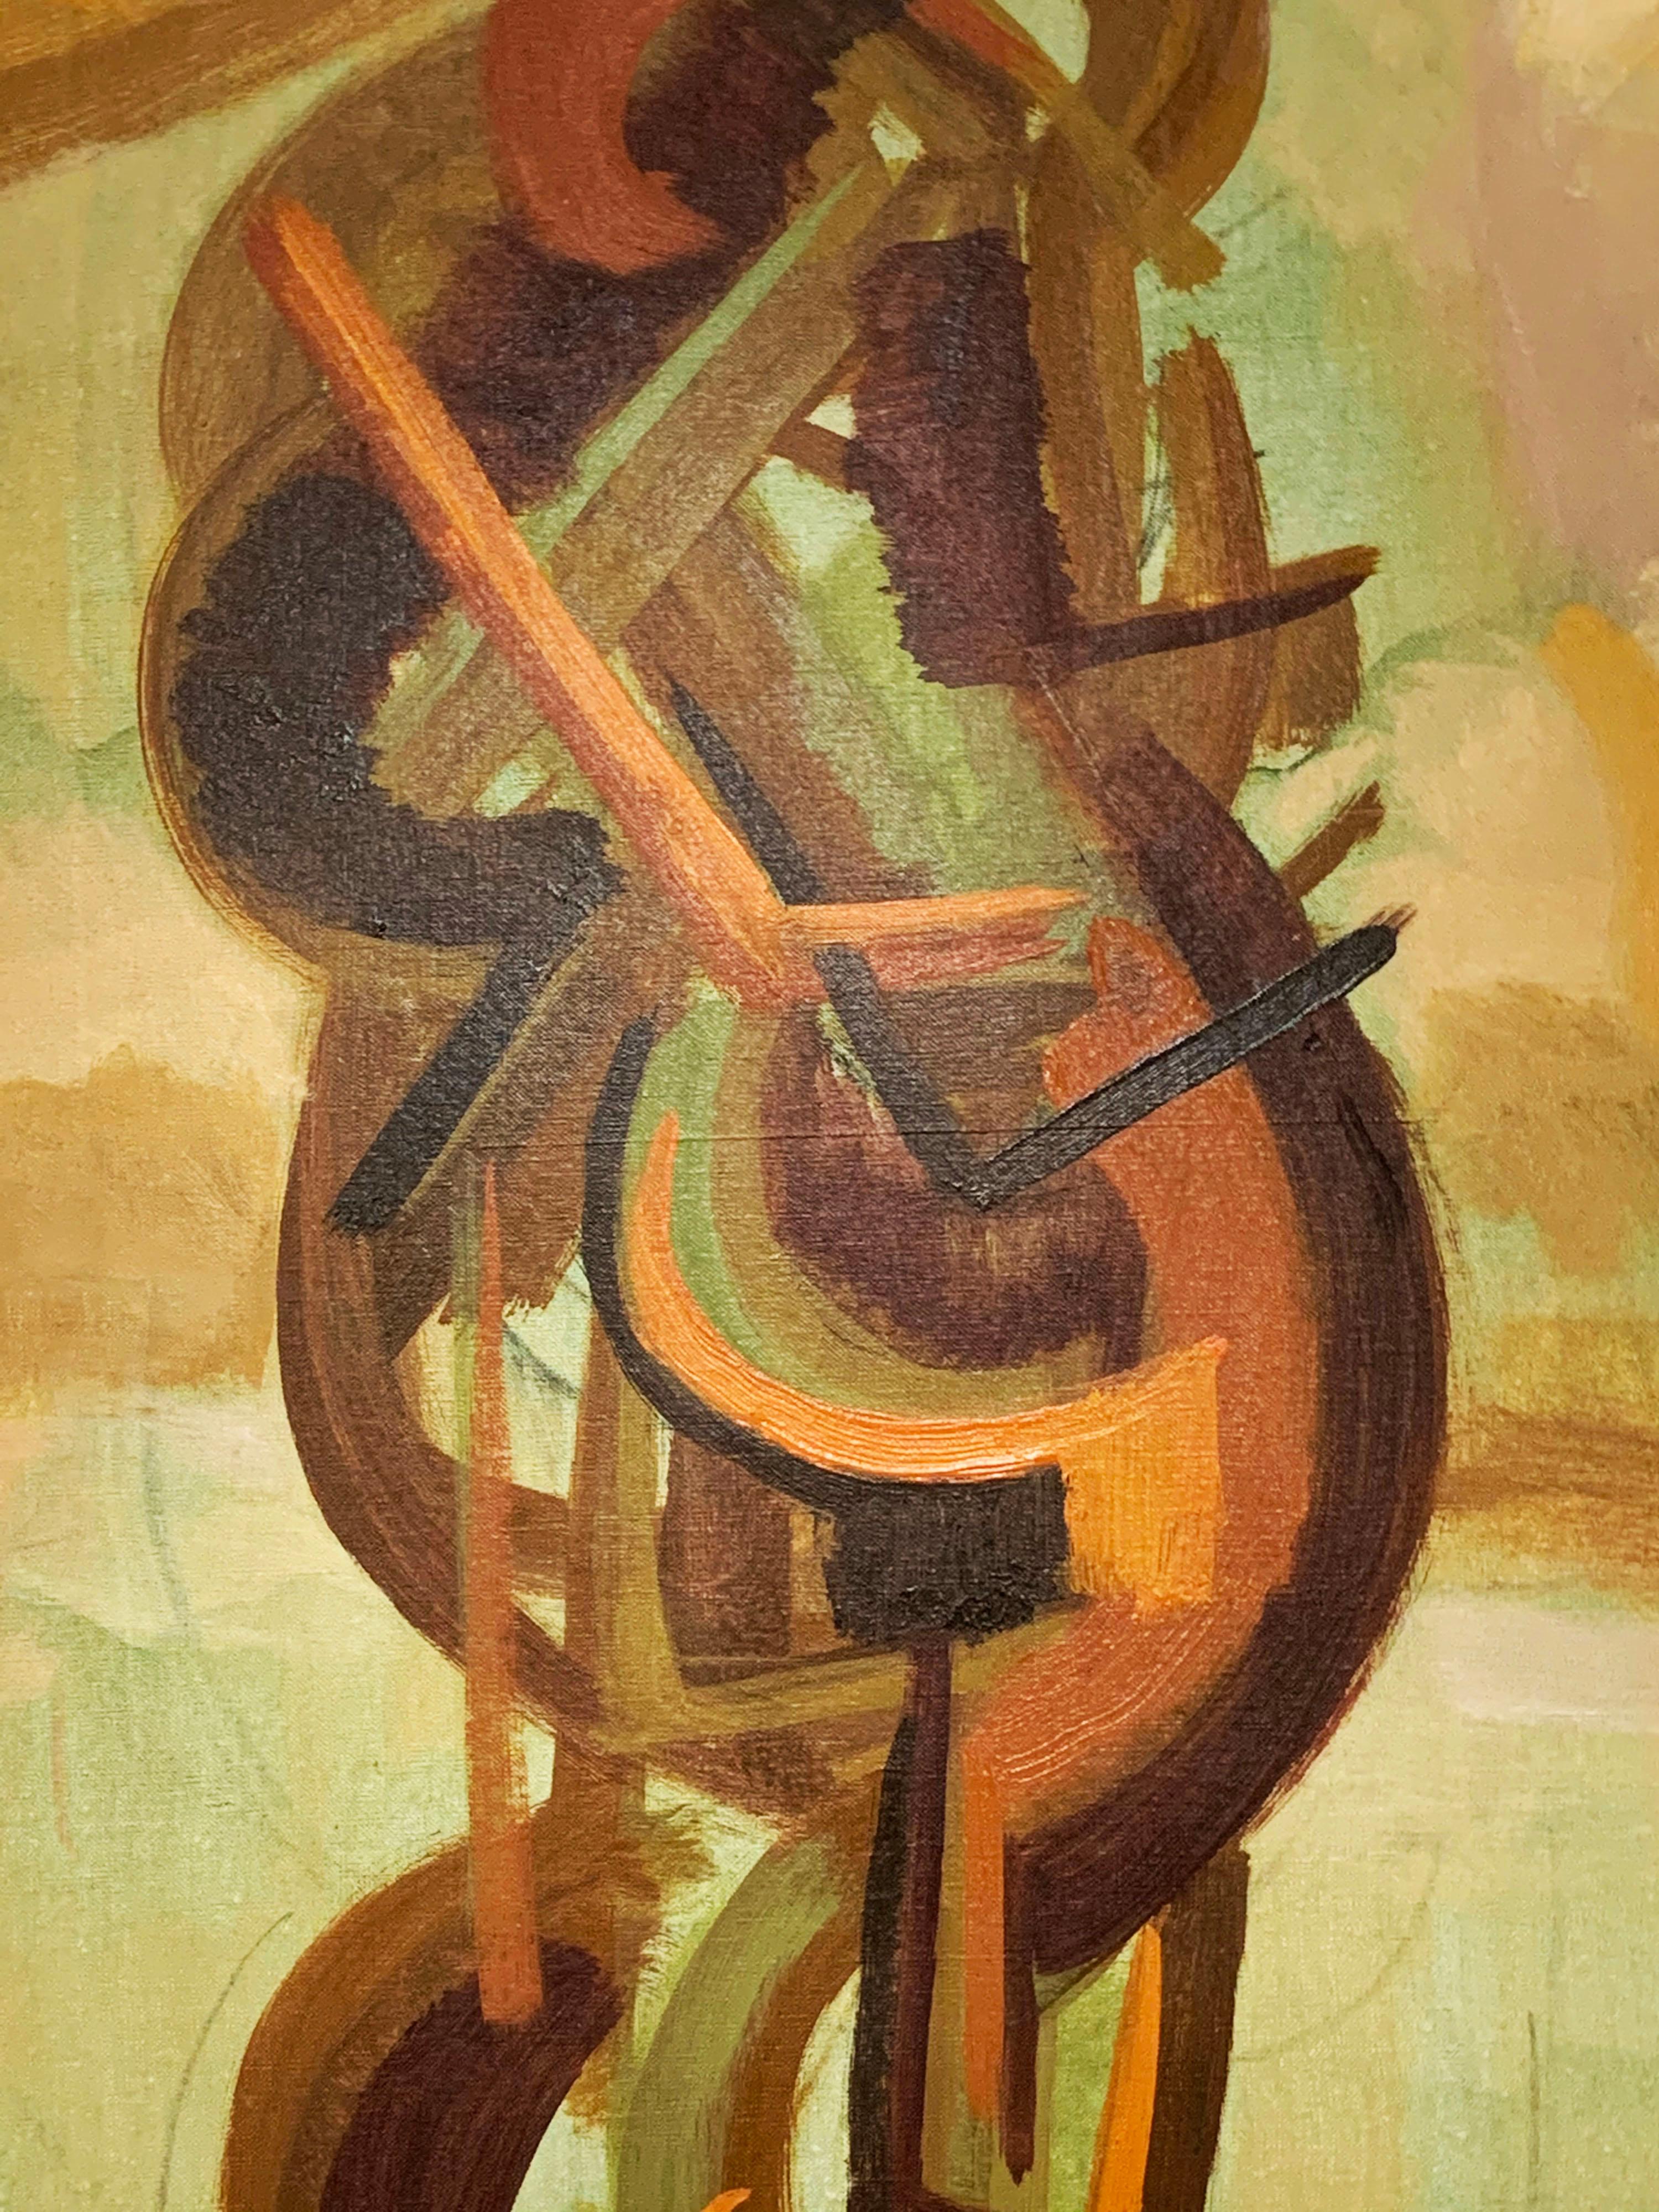 Abstract symbolist oil painting by Harold Mesibov, circa early 1950s.

Biography via Askart, supplied by The Boston Art Club:

